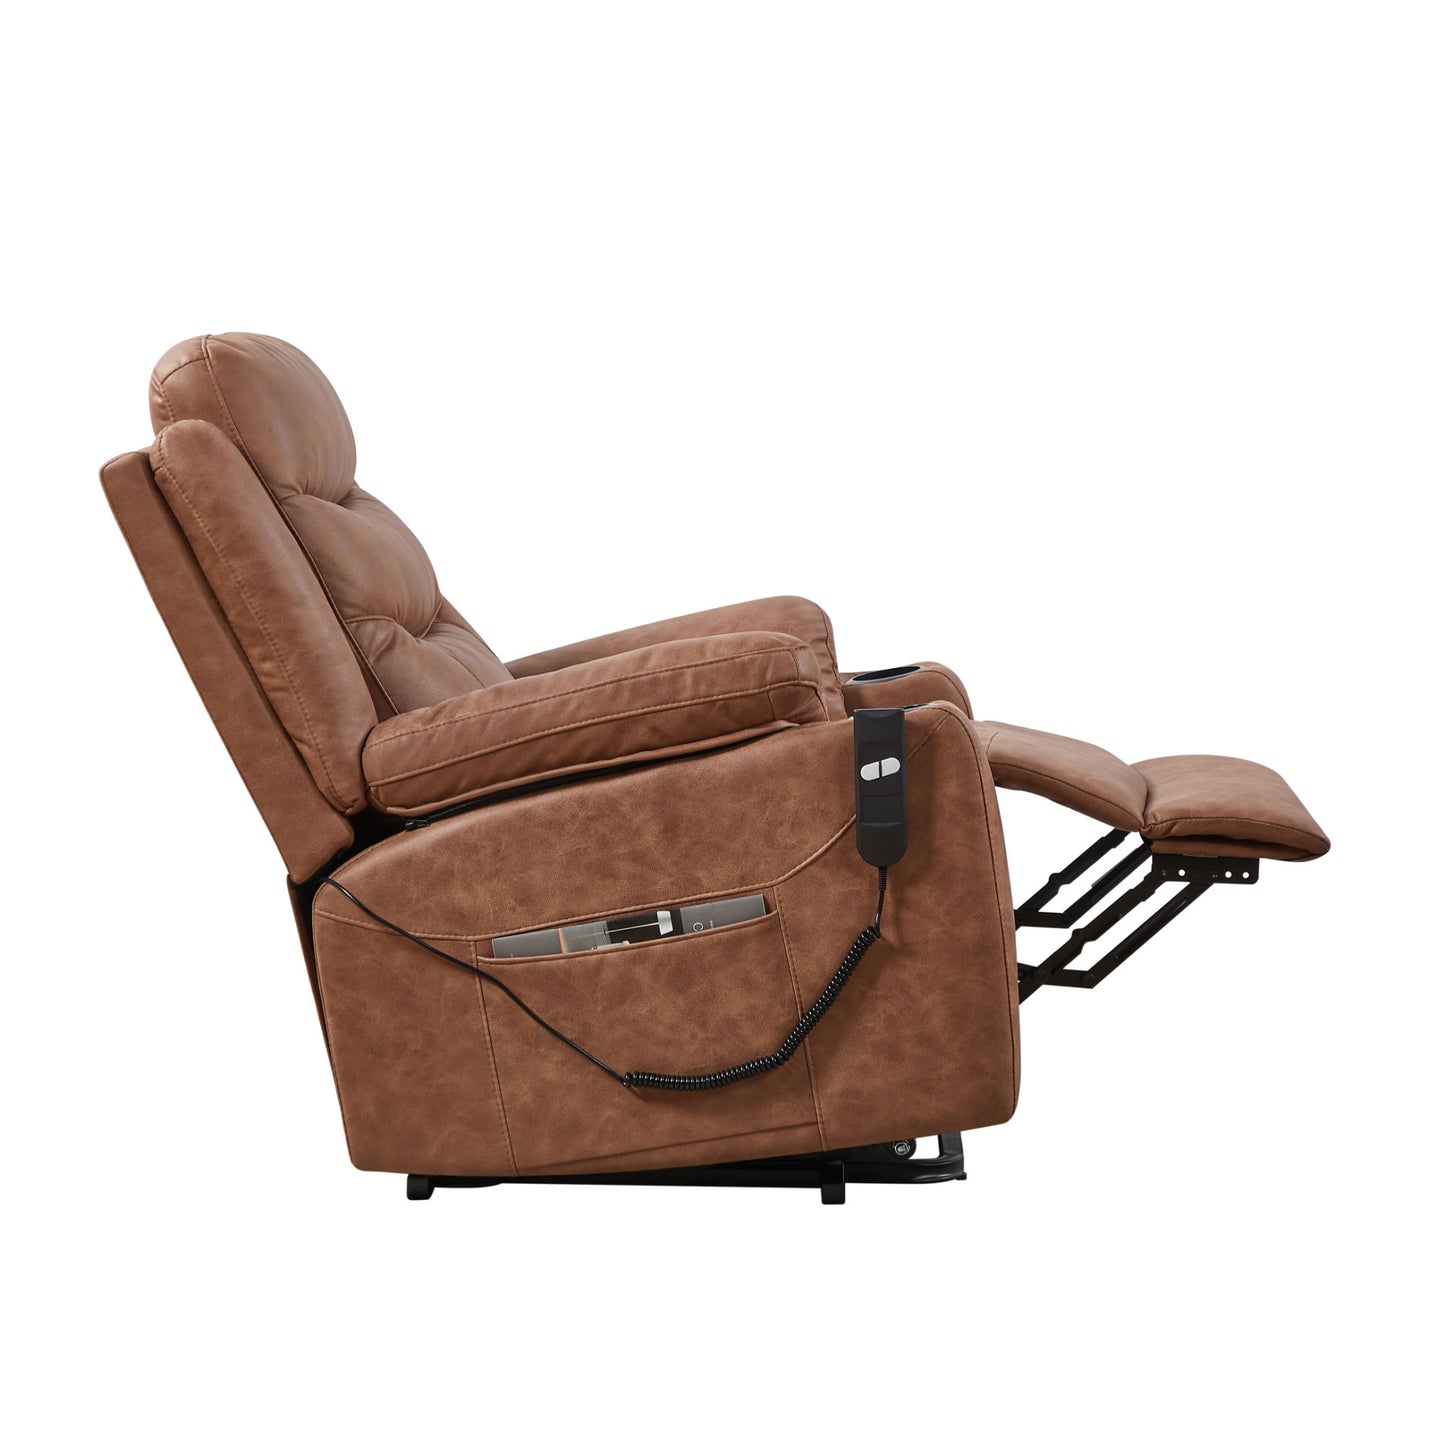 Liyasi Electric Power Lift Recliner Chair with 1 Motor, 3 Positions, 2 Side Pockets, Cup Holders,Suede fabric